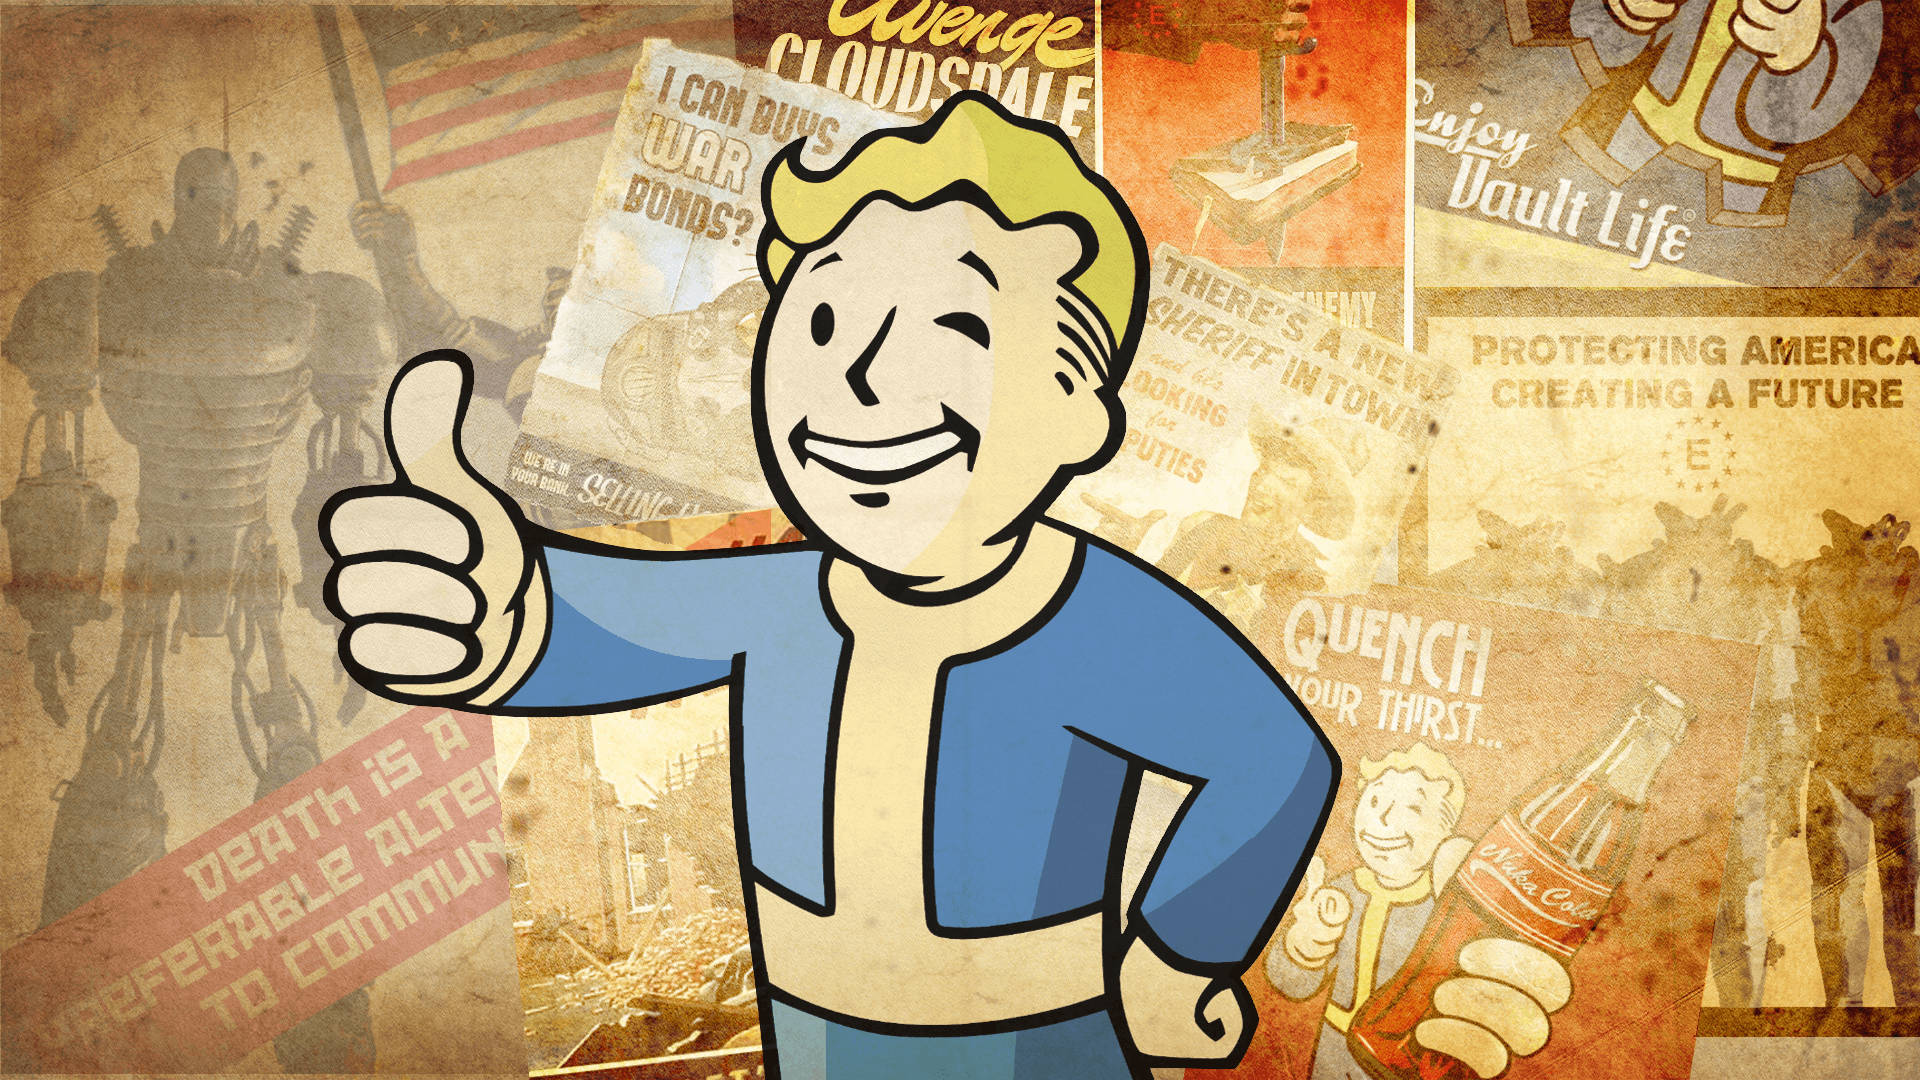 Fallout 4 Vault Boy On Vintage Posters Background